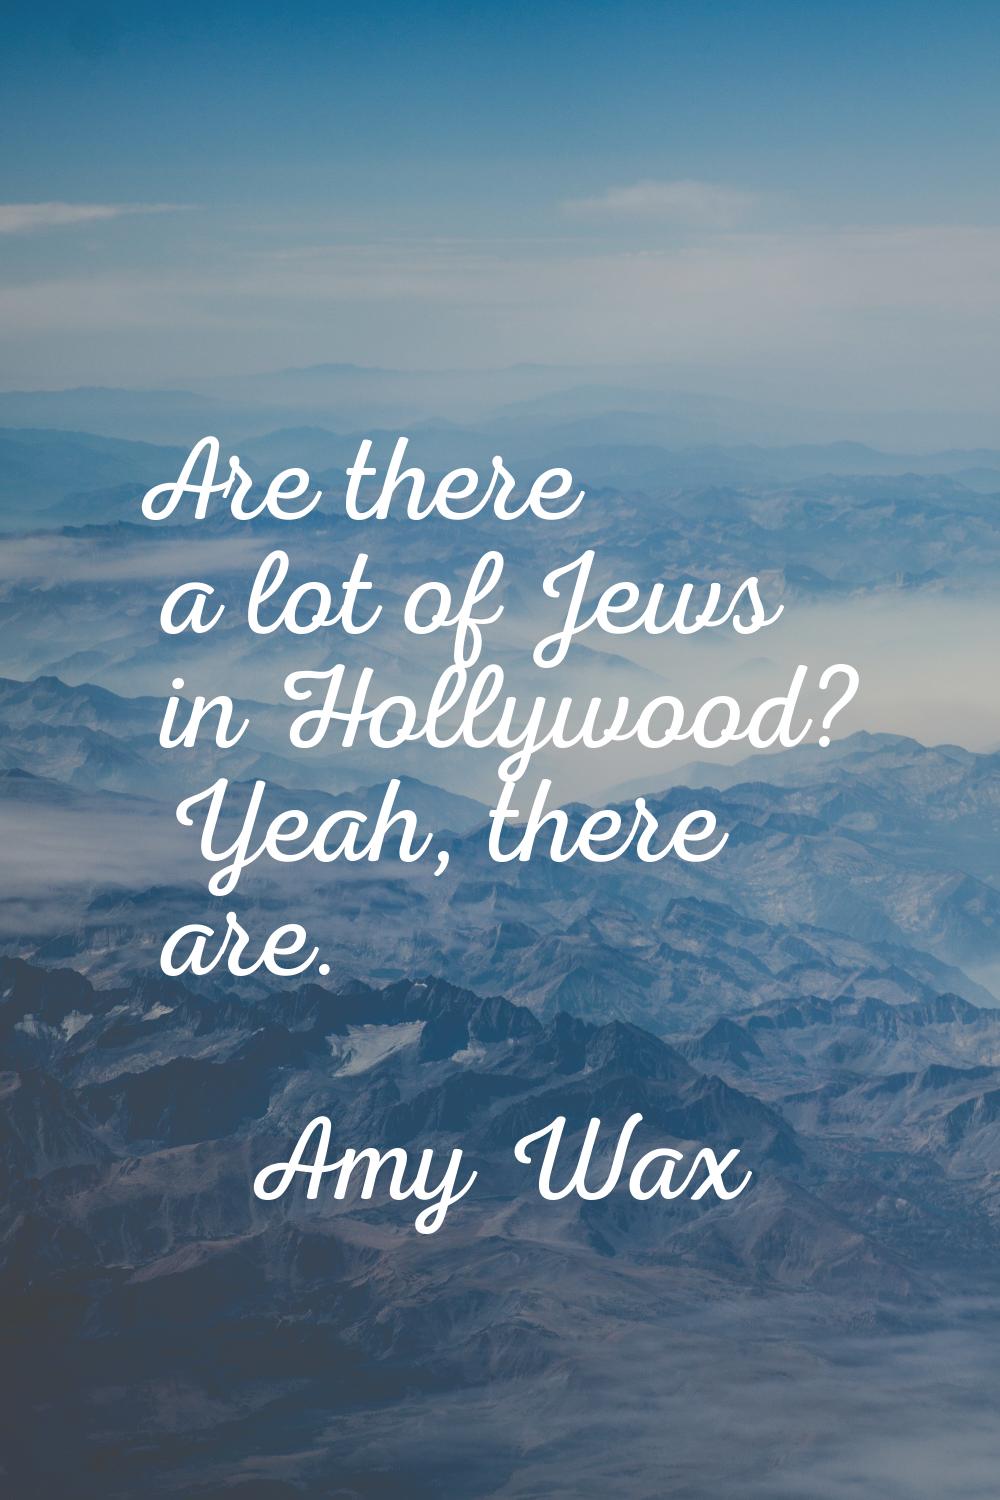 Are there a lot of Jews in Hollywood? Yeah, there are.